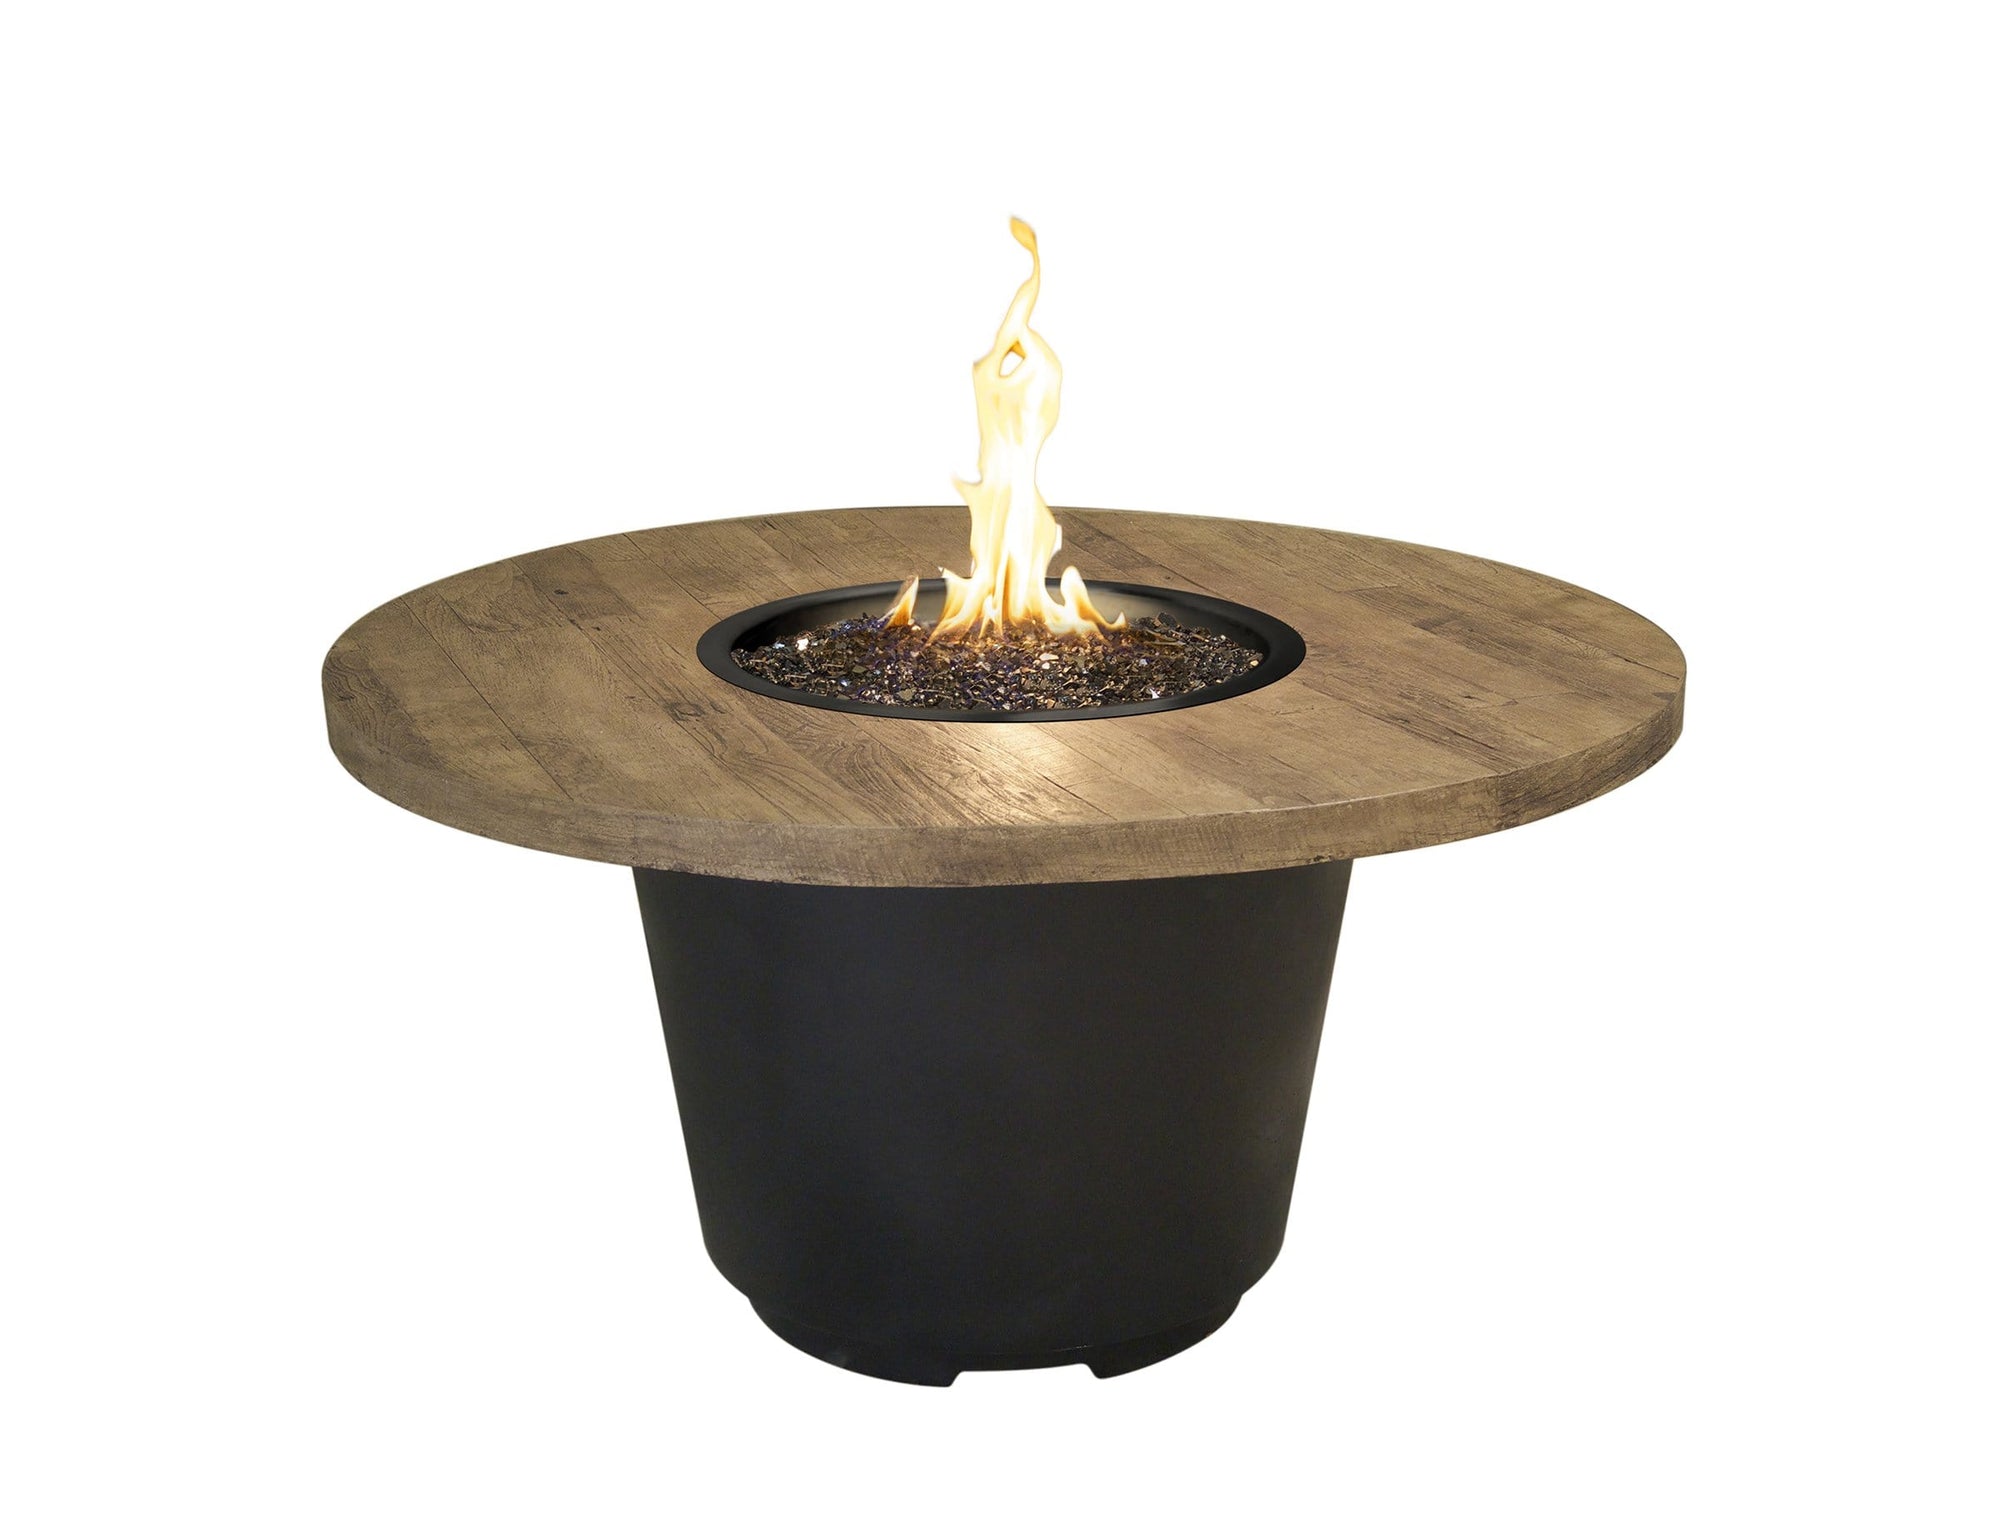 American Fyre Designs Fire Features French Barrel Oak / Natural Gas / Manual Ignition System American Fyre Designs 48" Reclaimed Wood Cosmopolitan Round Gas Firetable / French Barrel Oak or Silver Pine / 645-BA-FO-M2NC, 645-BA-FO-M2PC, 645-BA-SP-M2NC, 645-BA-SP-M2PC, 645-BA-FO-F2NC, 645-BA-FO-F2PC, 645-BA-FO-F2NC, or 645-BA-FO-F2PC